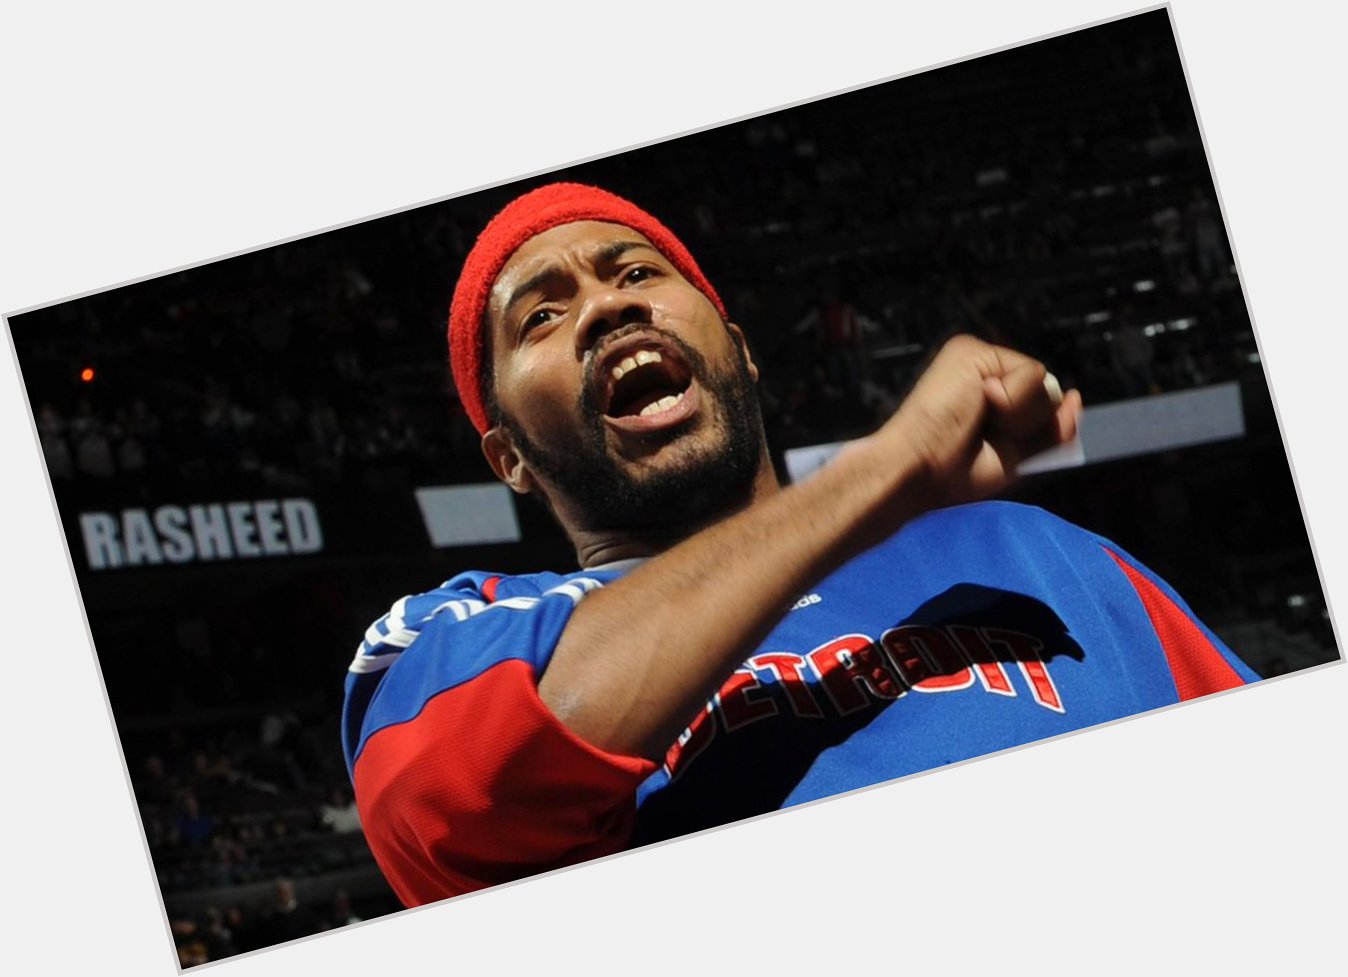 Calendar Don\t Lie!

Happy 41st Birthday to 4-time All-Star Rasheed Wallace

 